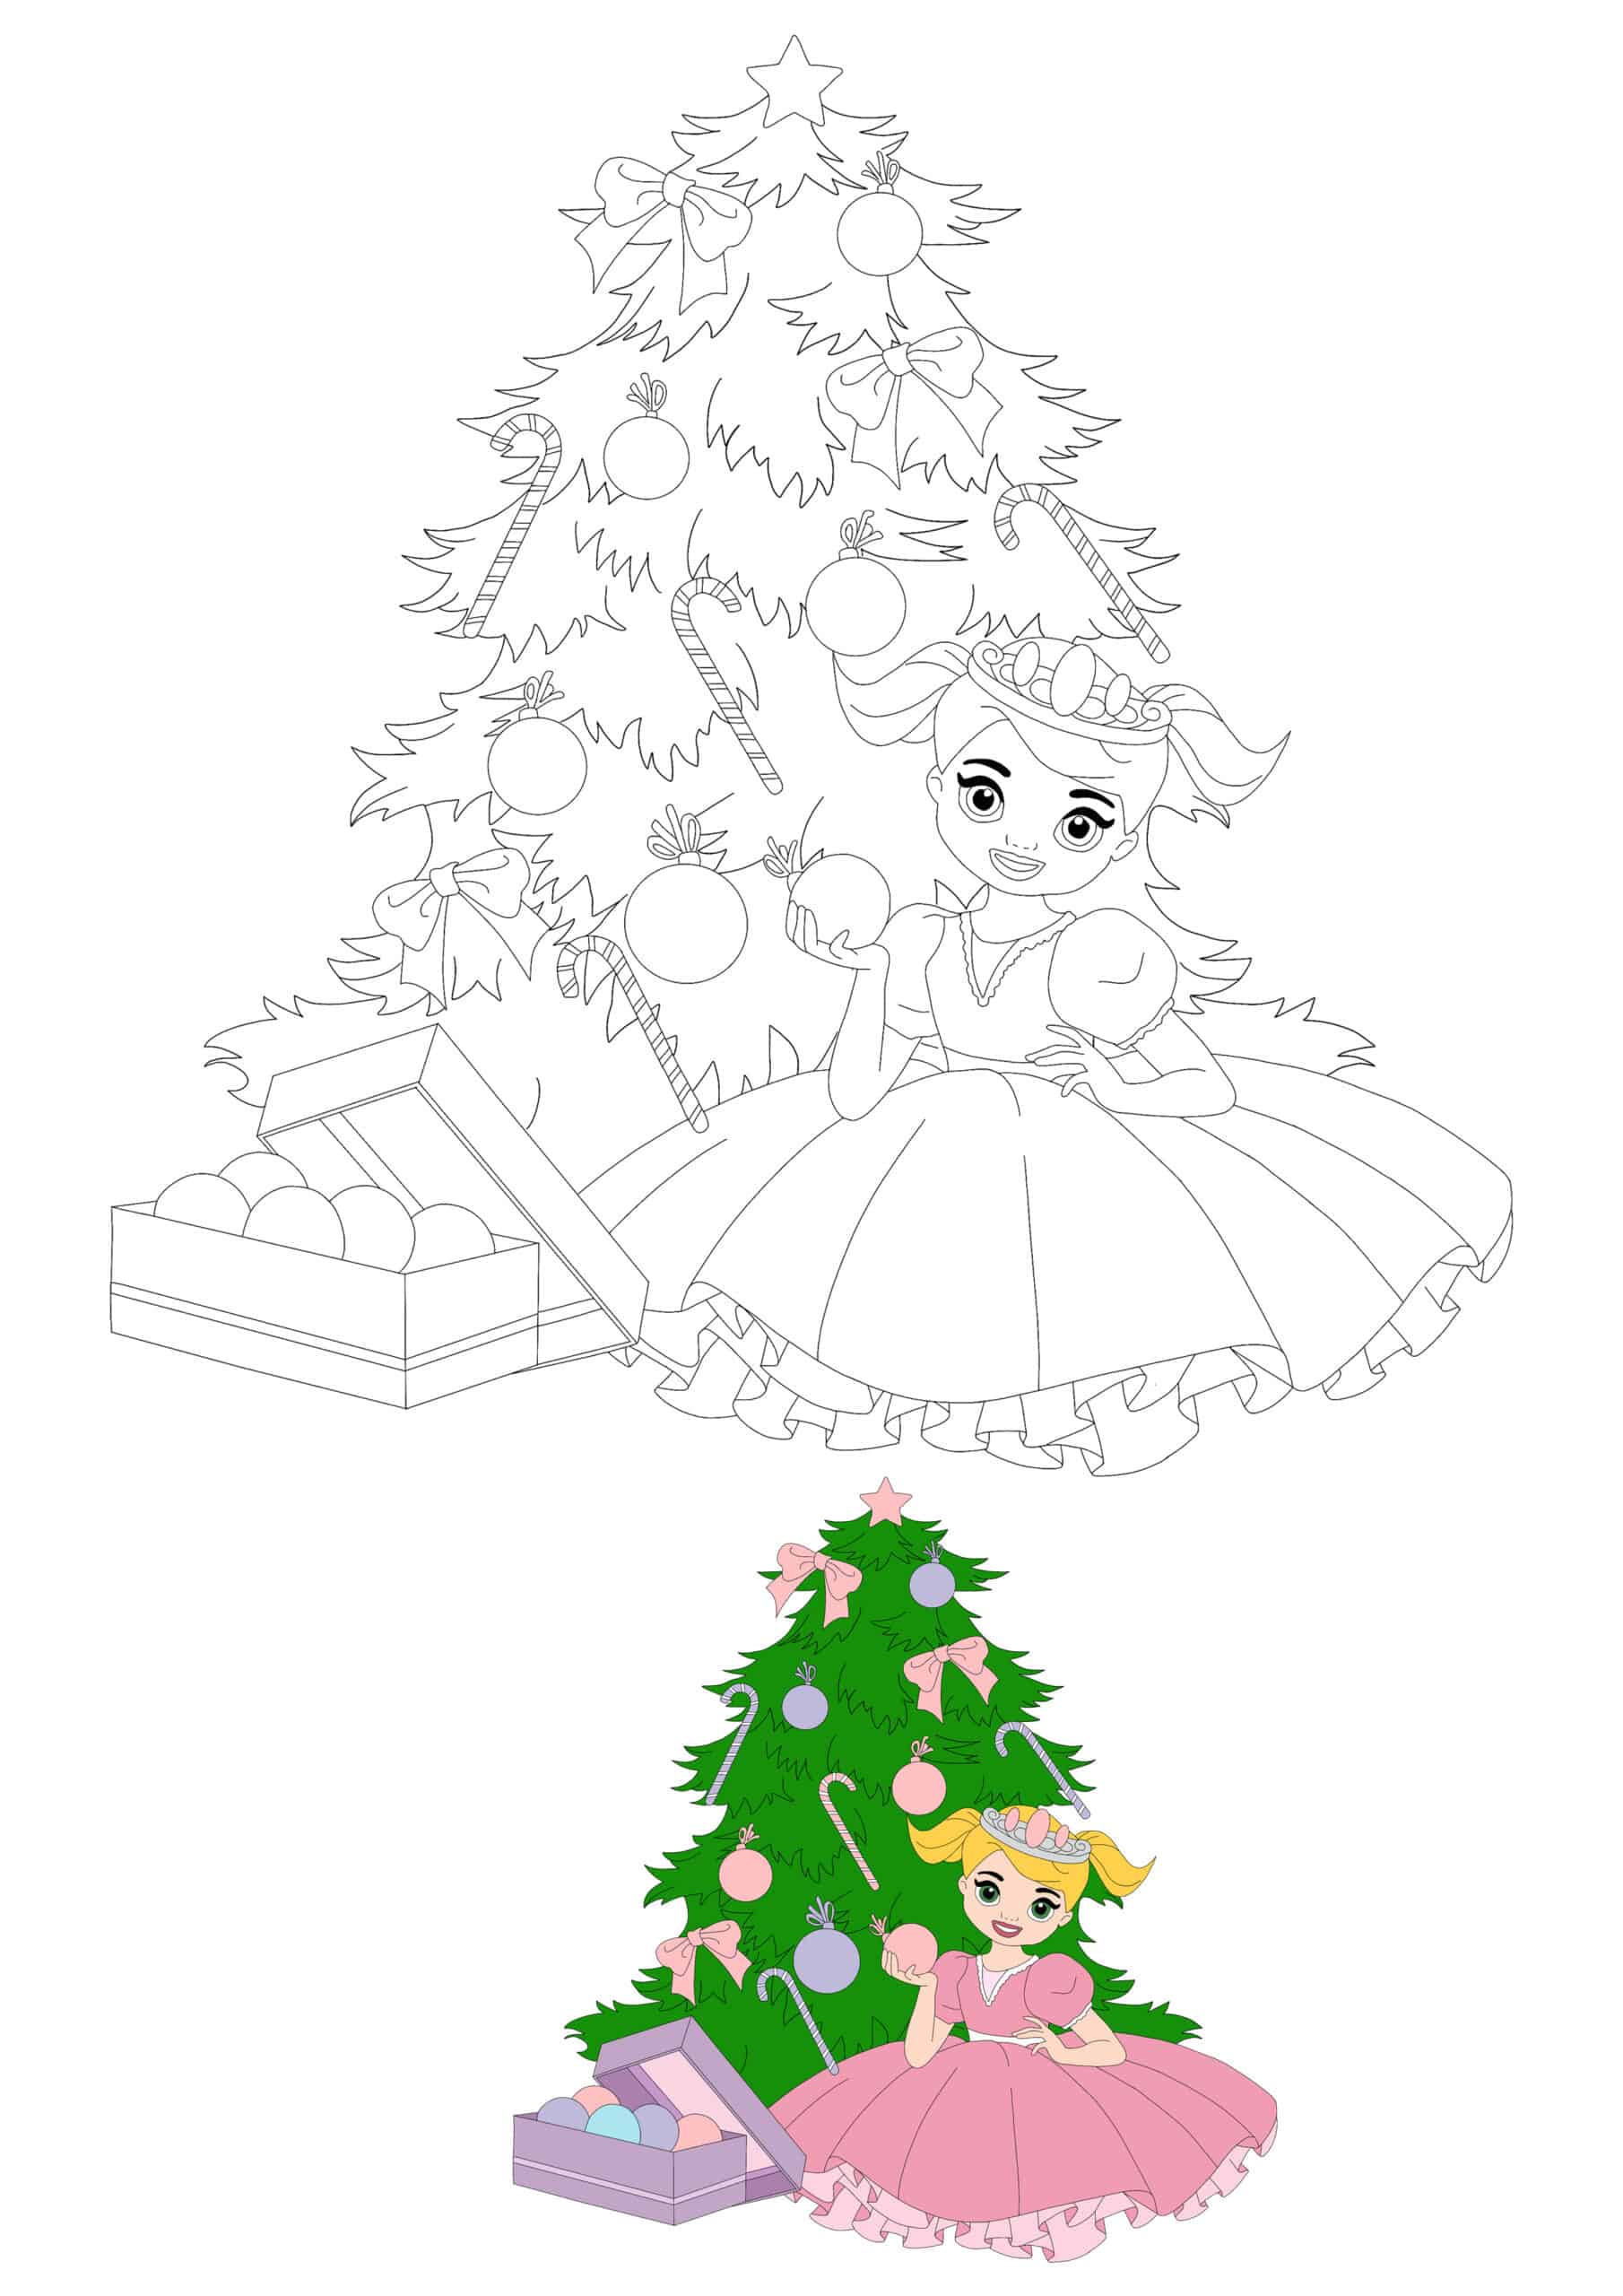 Little Princess Decorating Christmas Tree Coloring Page